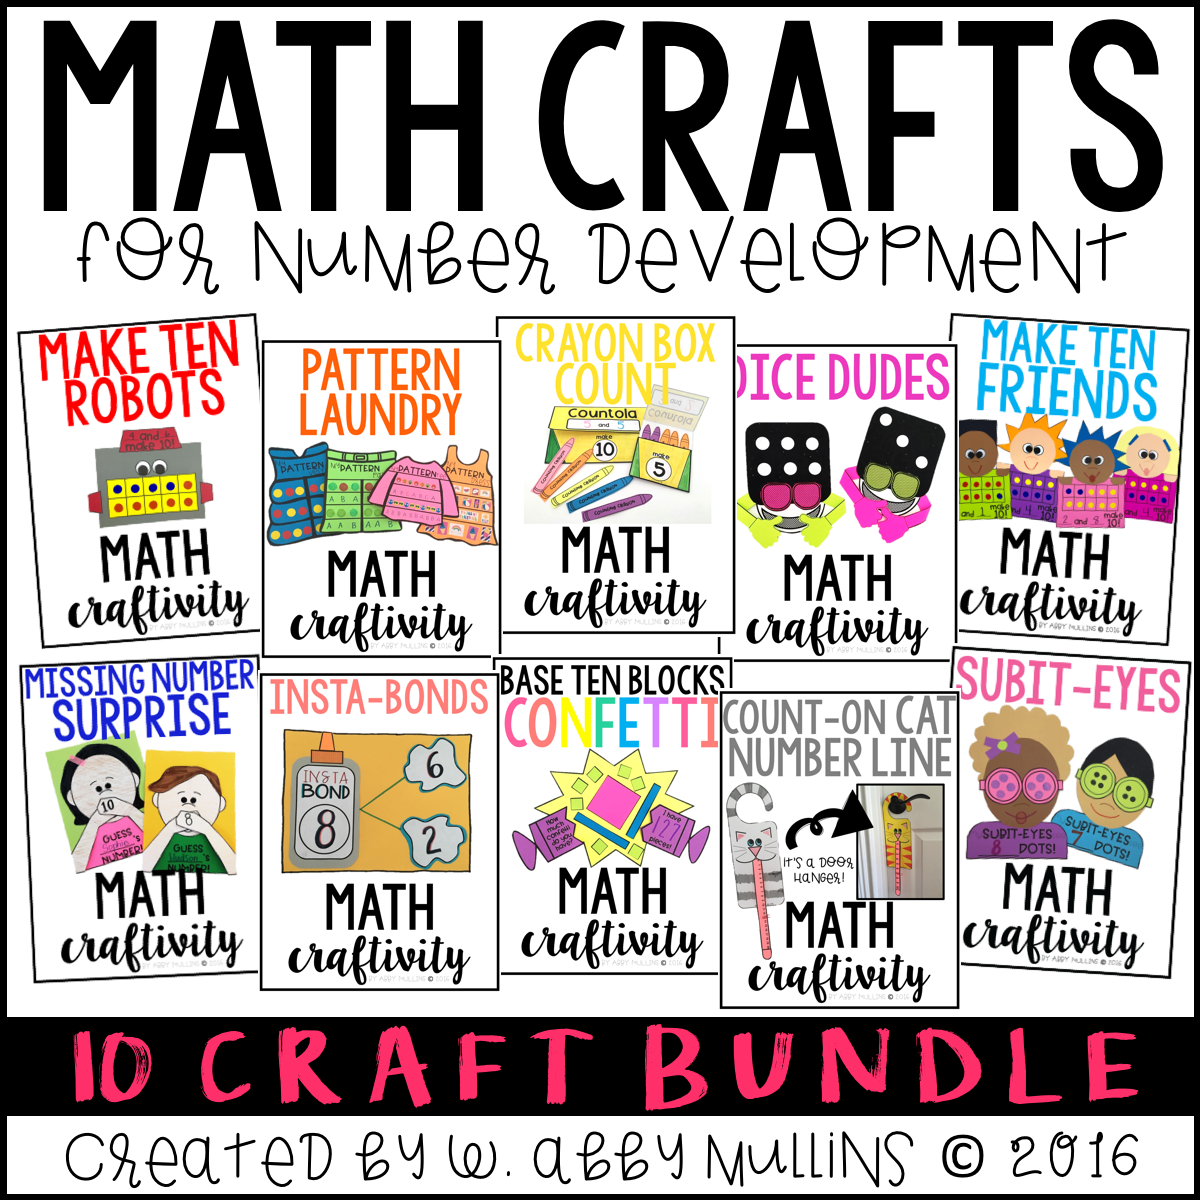 Kids in kindergarten and first grade will LOVE these math crafts! Make learning fun AND support number development! Skills included are: making 5 and 10, decomposing numbers, subitizing, ten frames, number lines, patterning, and more! 1d